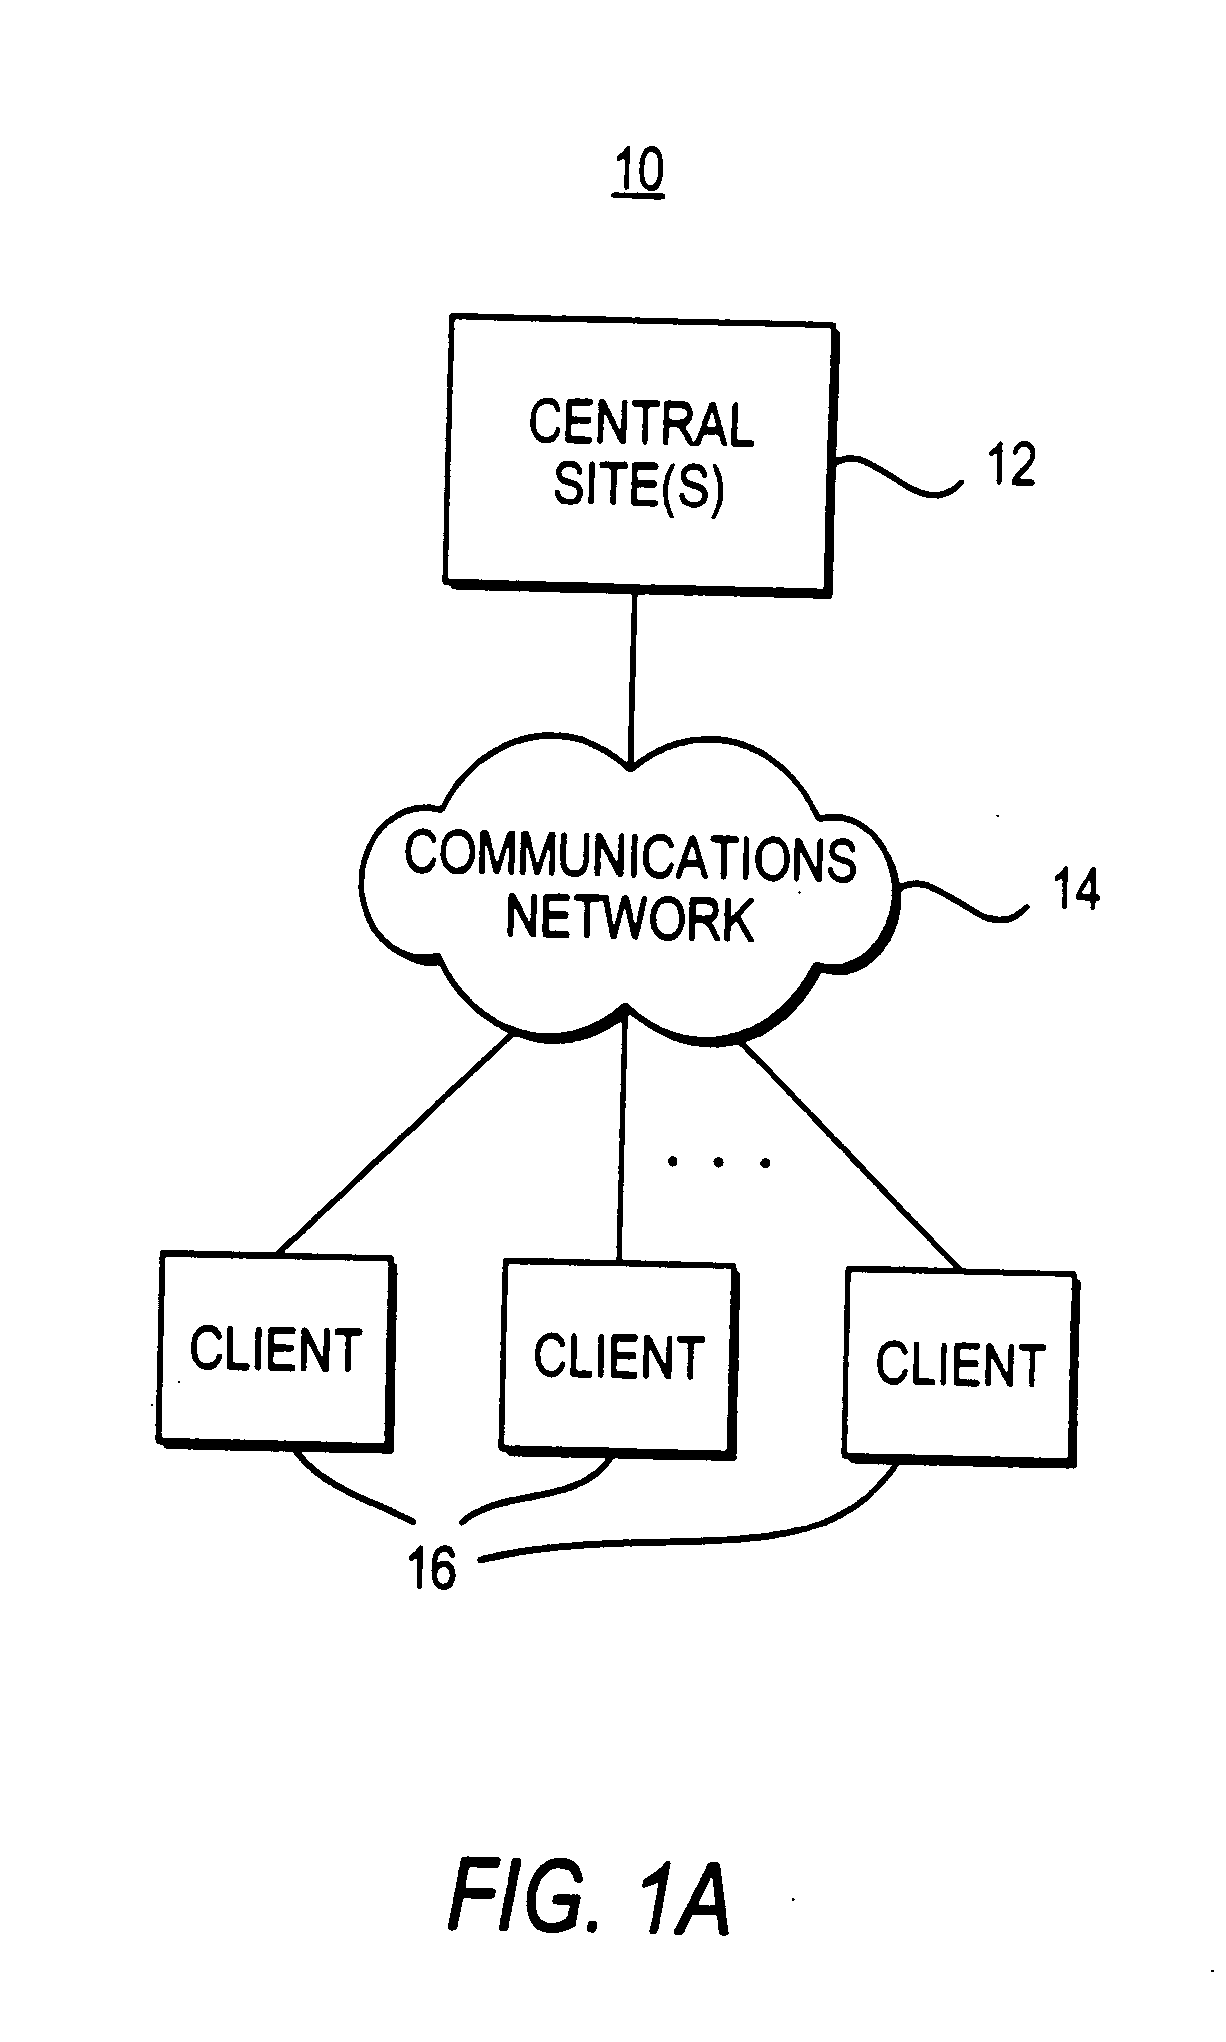 Systems and methods for providing component information in collaborative design, construction, and maintenance of fluid processing plants